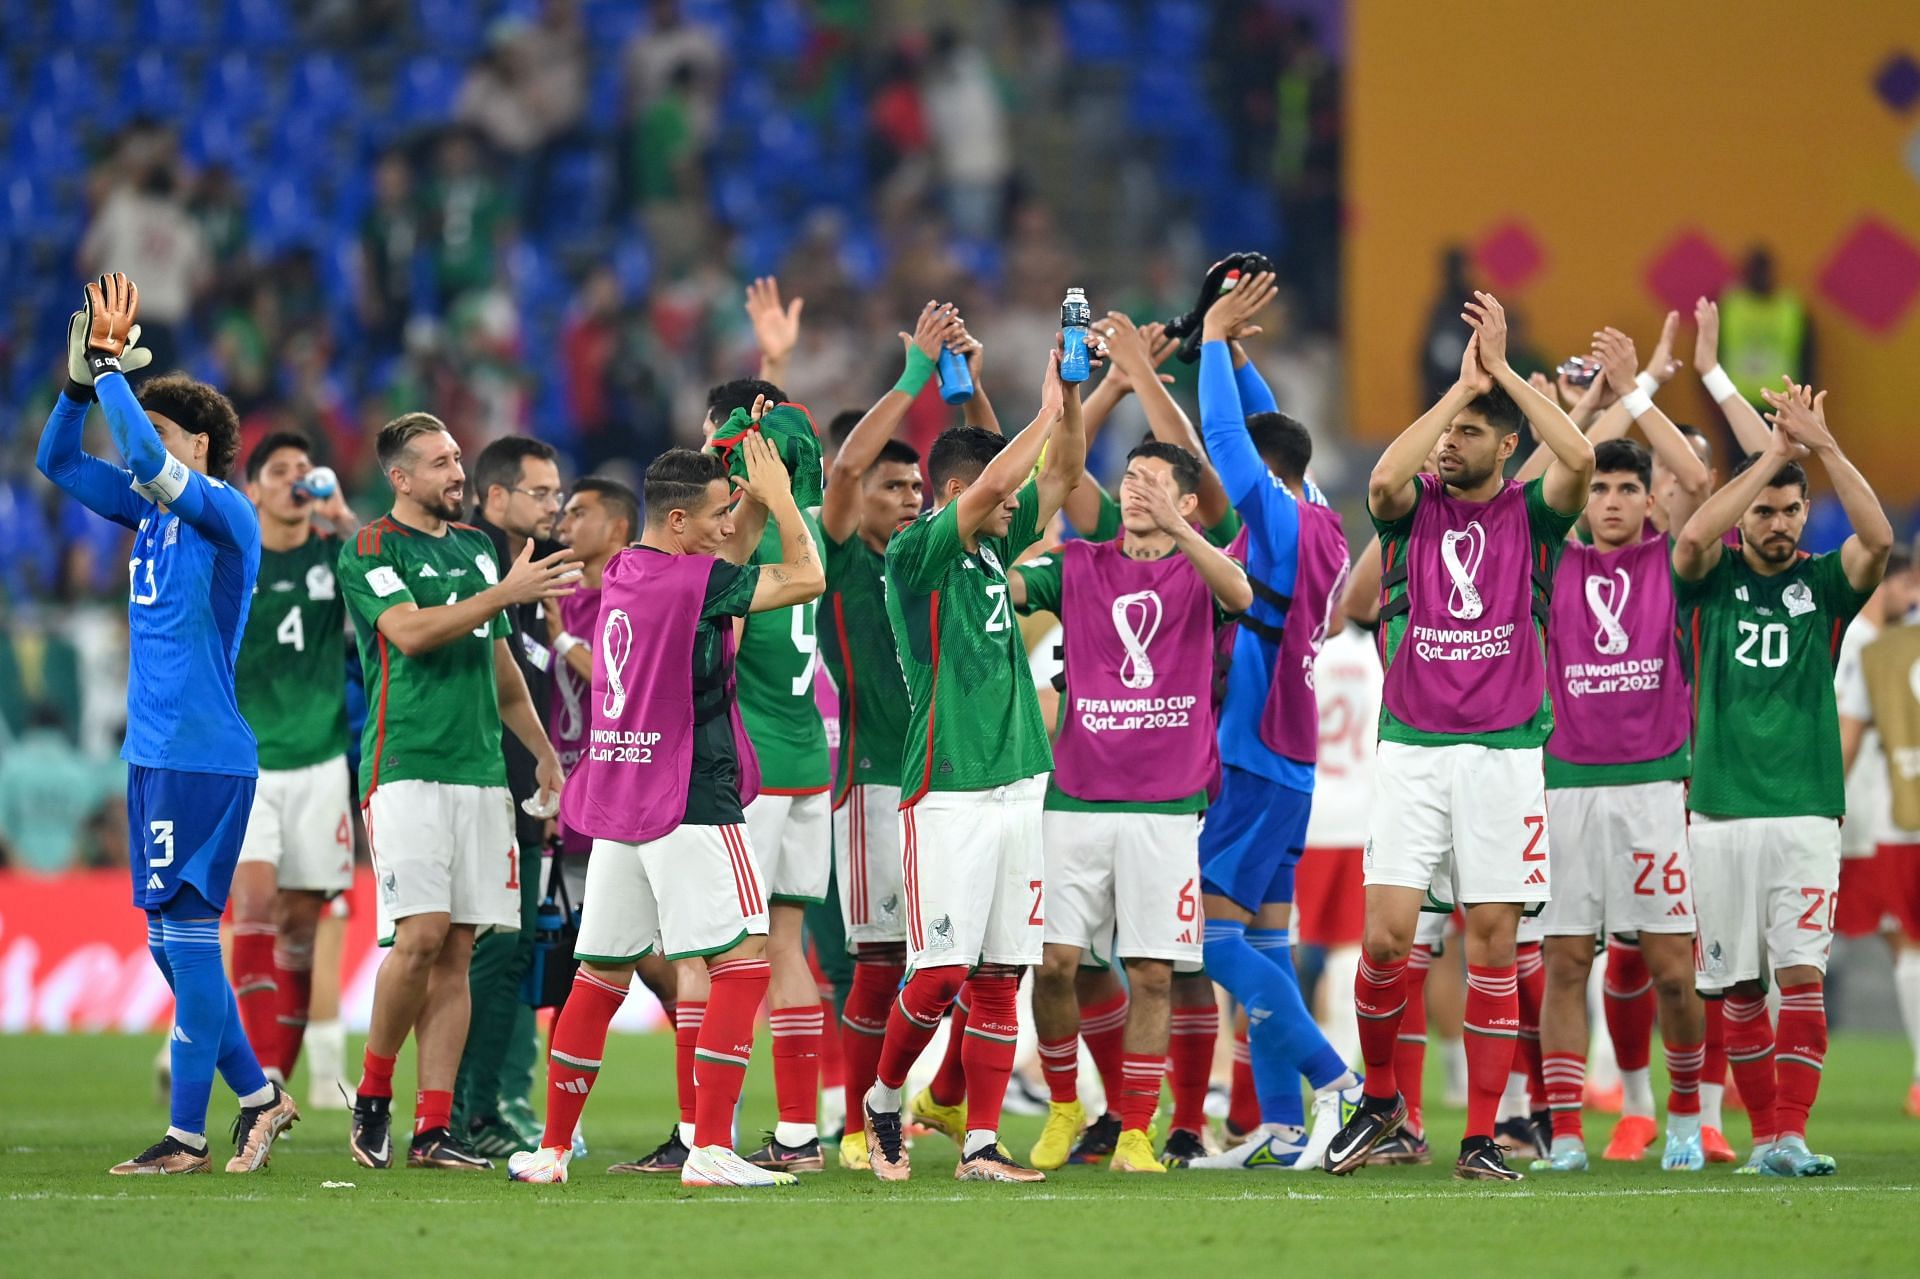 Mexico will face Argentina in their next Group C game in Qatar